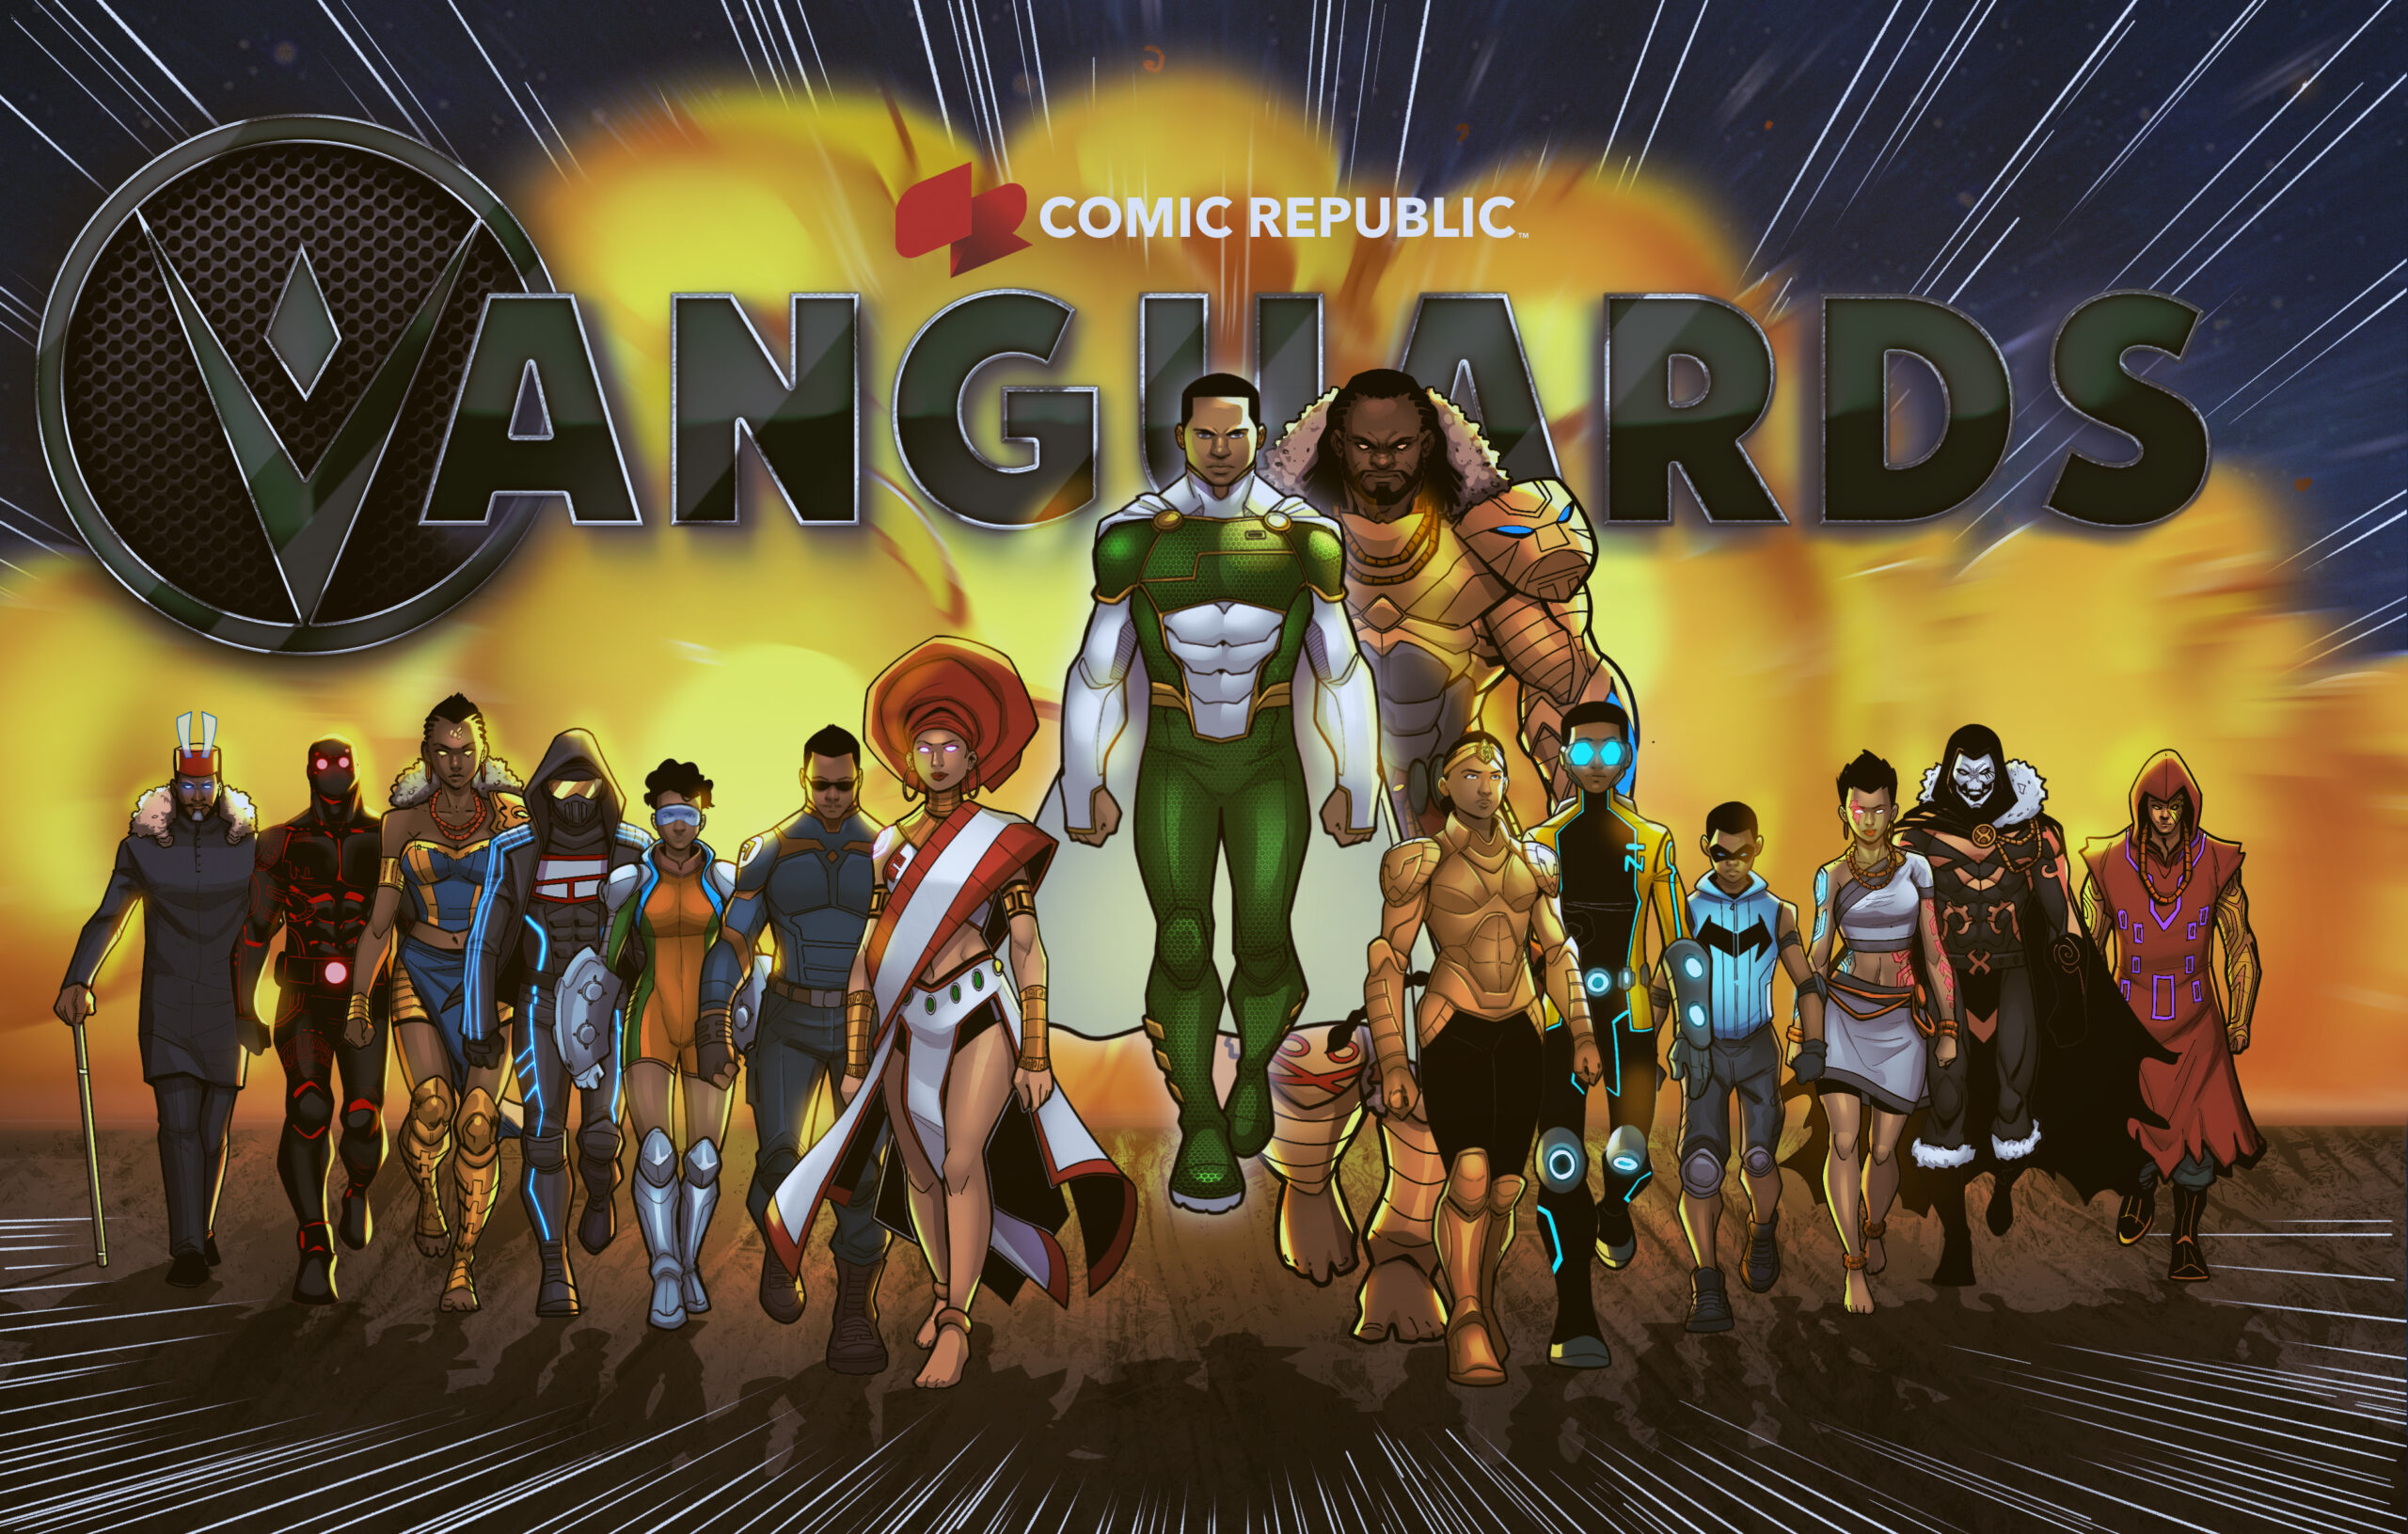 Vanguards Super Poster BRANDED scaled - Nigeria’s Comic Republic Inks IP Development Deal With Universal Studio Group’s UCP